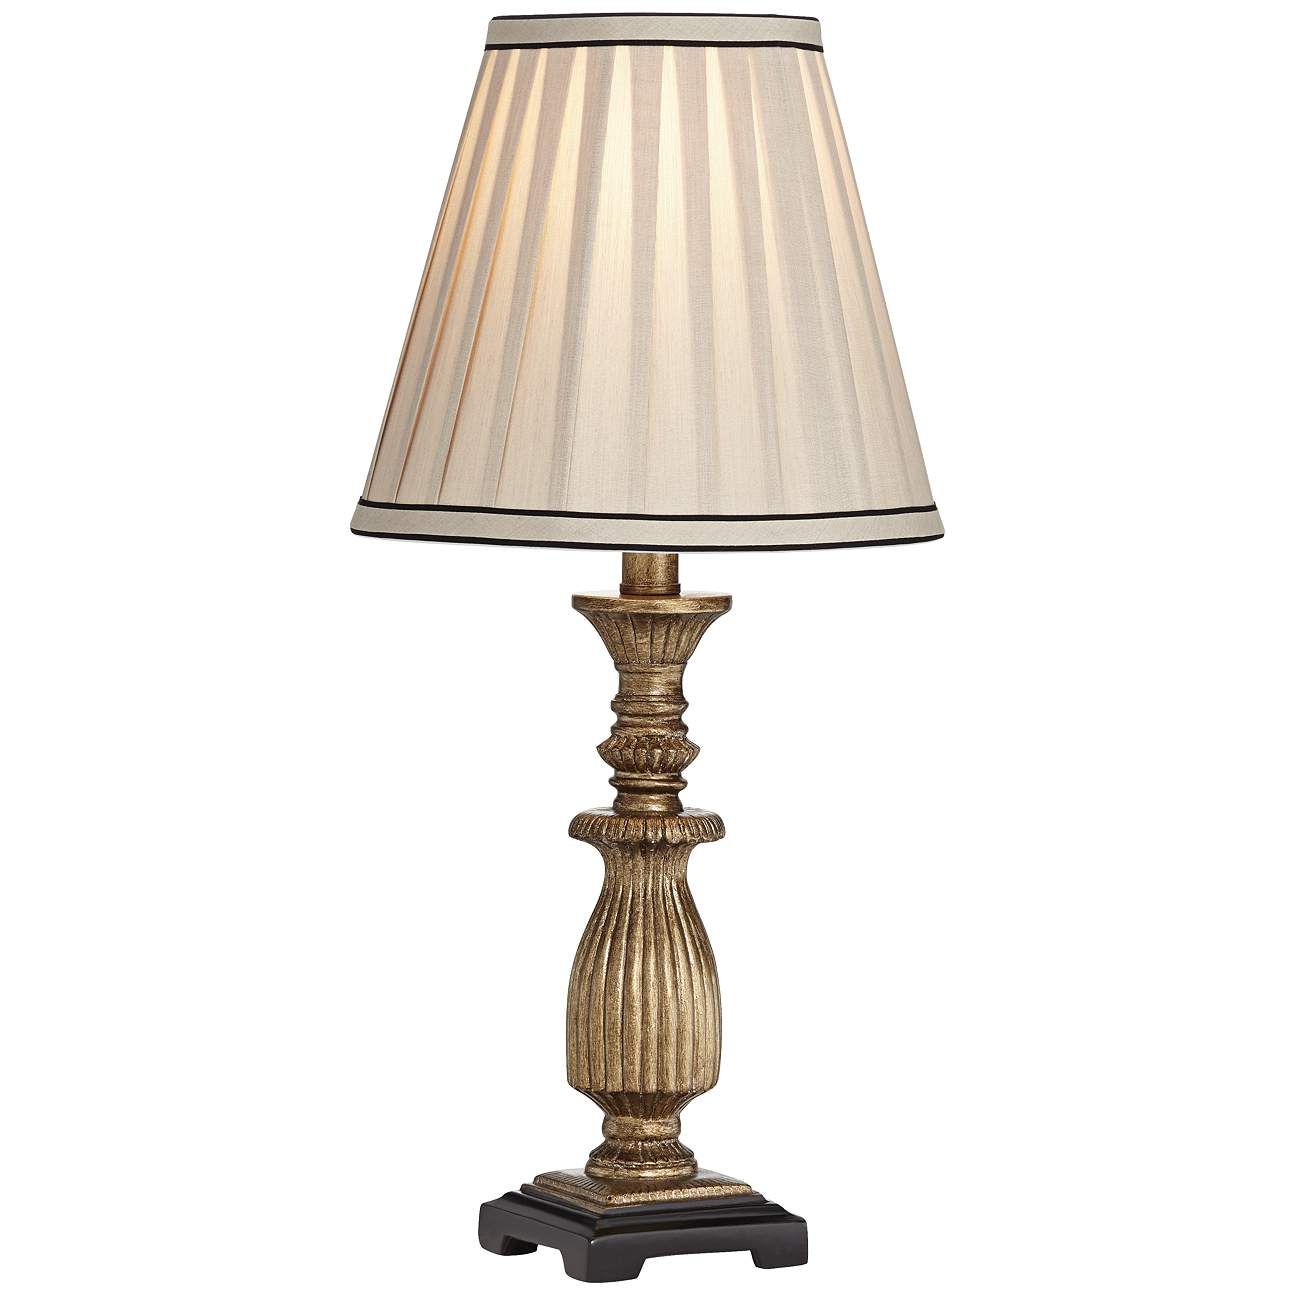 Ribbed 18" High Antique Gold with Pleat Shade Accent Lamp - #W8646 | Lamps Plus | Lamps Plus